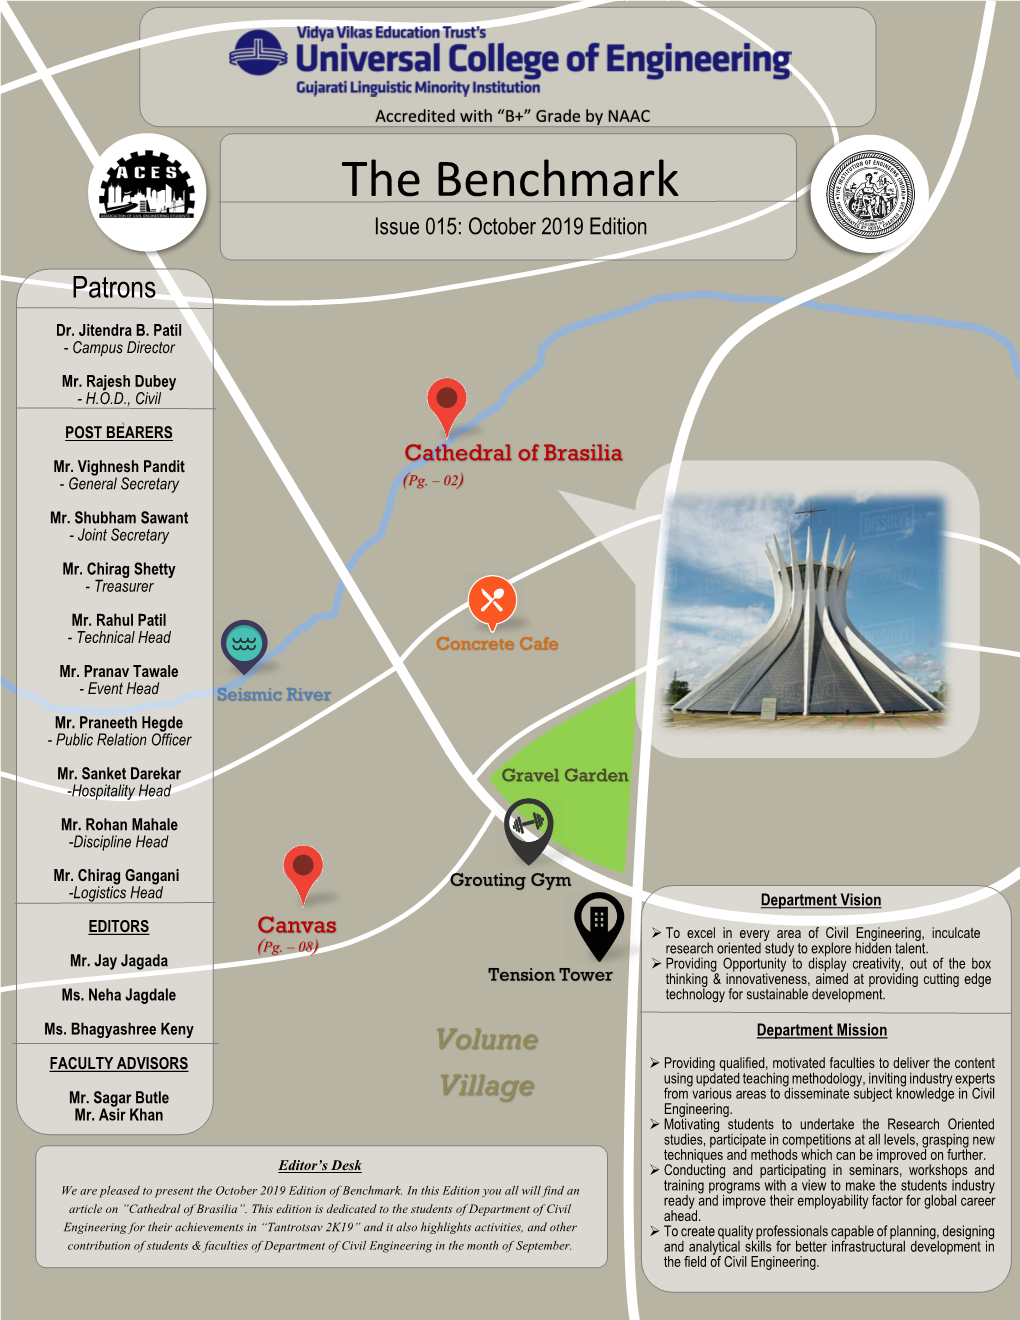 The Benchmark-October 2019